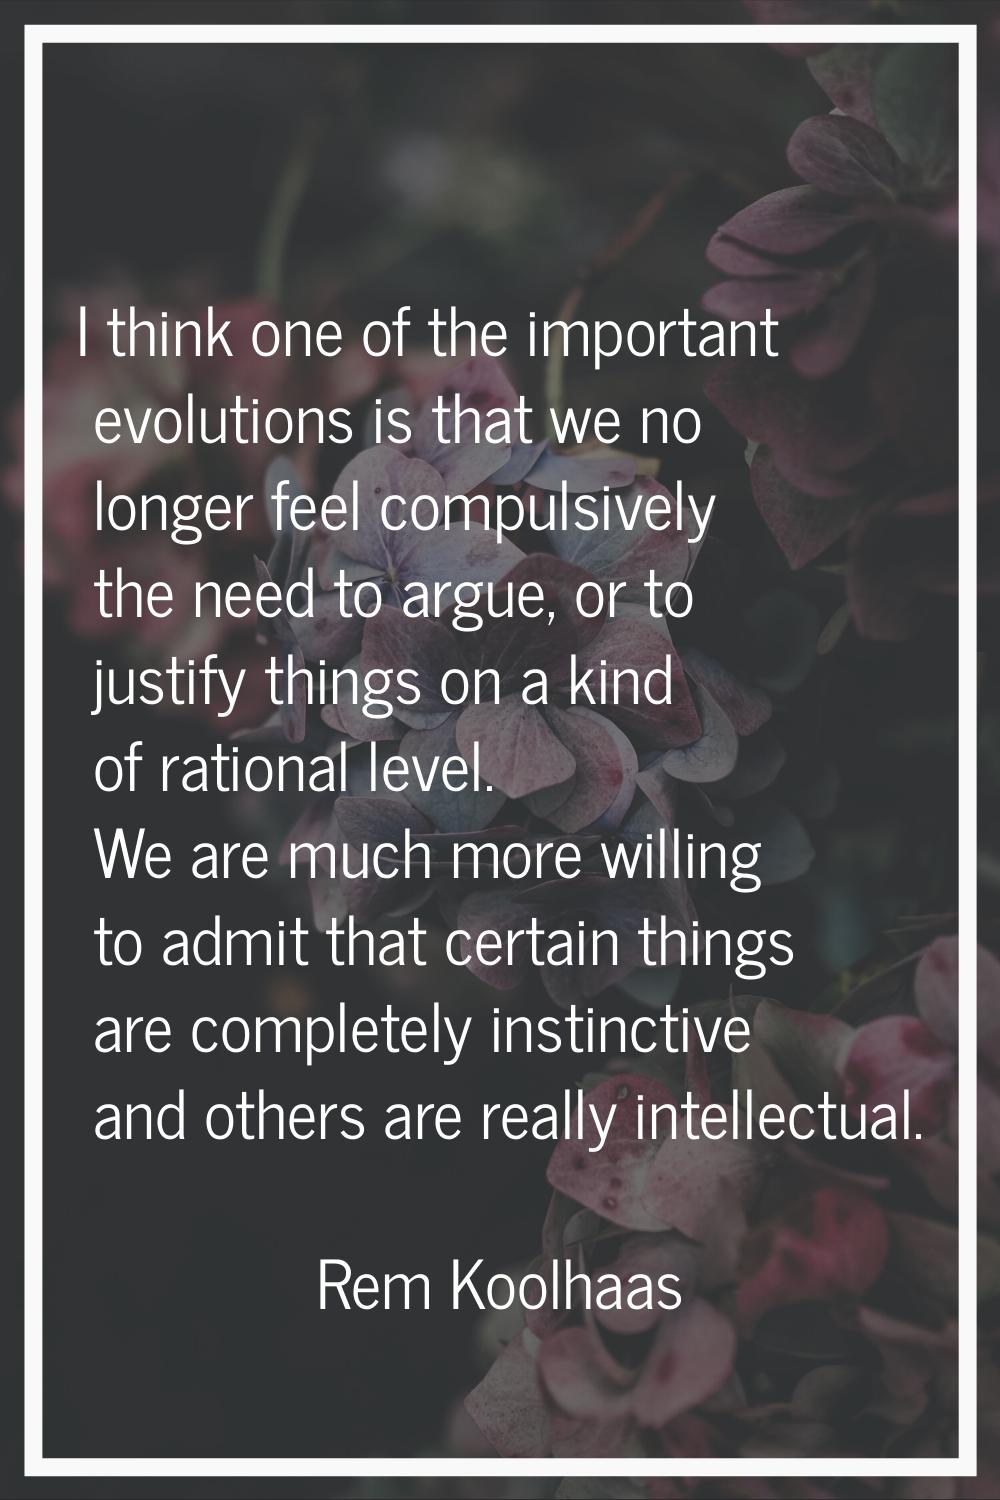 I think one of the important evolutions is that we no longer feel compulsively the need to argue, o